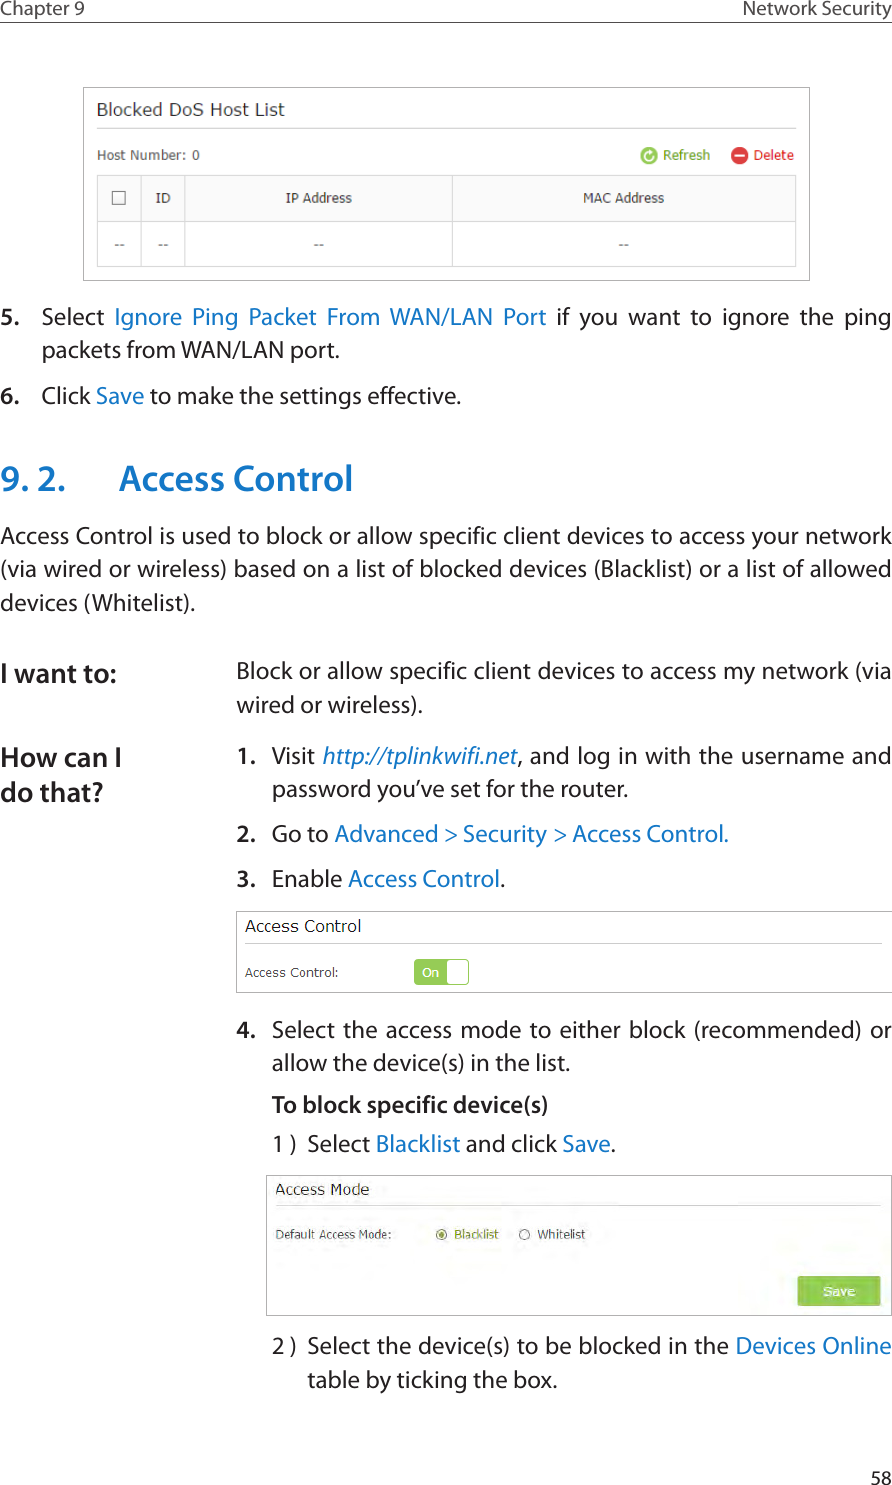 58Chapter 9 Network Security5.  Select  Ignore Ping Packet From WAN/LAN Port if you want to ignore the ping packets from WAN/LAN port.6.  Click Save to make the settings effective.9. 2.  Access ControlAccess Control is used to block or allow specific client devices to access your network (via wired or wireless) based on a list of blocked devices (Blacklist) or a list of allowed devices (Whitelist).Block or allow specific client devices to access my network (via wired or wireless).1.  Visit http://tplinkwifi.net, and log in with the username and password you’ve set for the router.2.  Go to Advanced &gt; Security &gt; Access Control.3.  Enable Access Control.4.  Select the access mode to either block (recommended) or allow the device(s) in the list.To block specific device(s)1 )  Select Blacklist and click Save.2 )  Select the device(s) to be blocked in the Devices Online table by ticking the box.I want to:How can I do that?